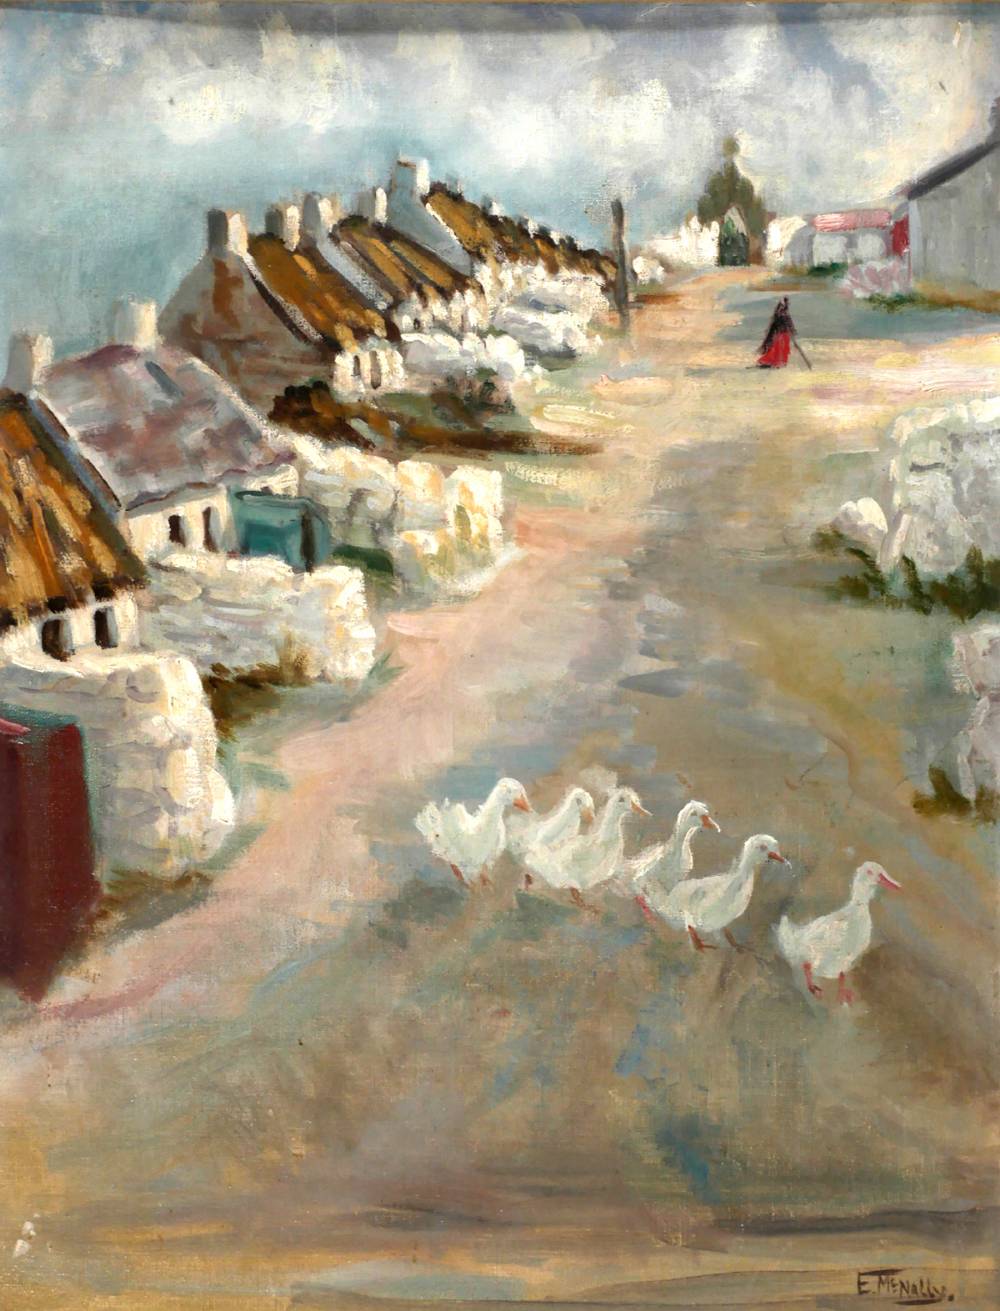 DUCKS AND COTTAGES, WEST OF IRELAND by Eithne McNally (1910-1996) at Whyte's Auctions